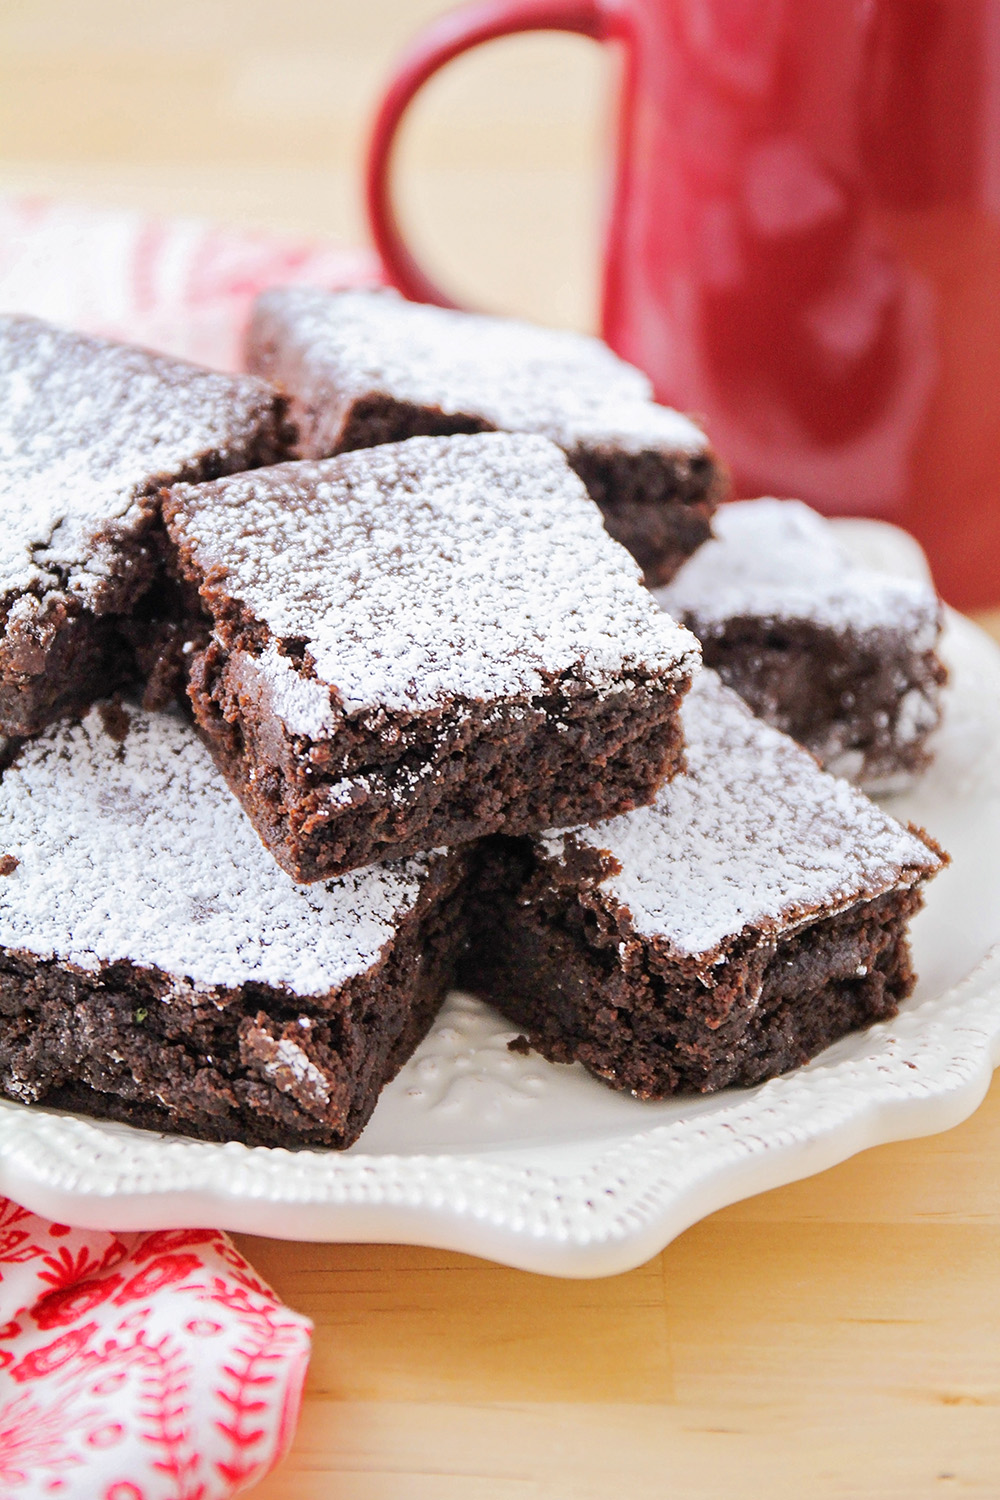 These delicious chocolate gingerbread brownies have a sweet combination of dark chocolate and a hint of spice, and are totally unforgettable!